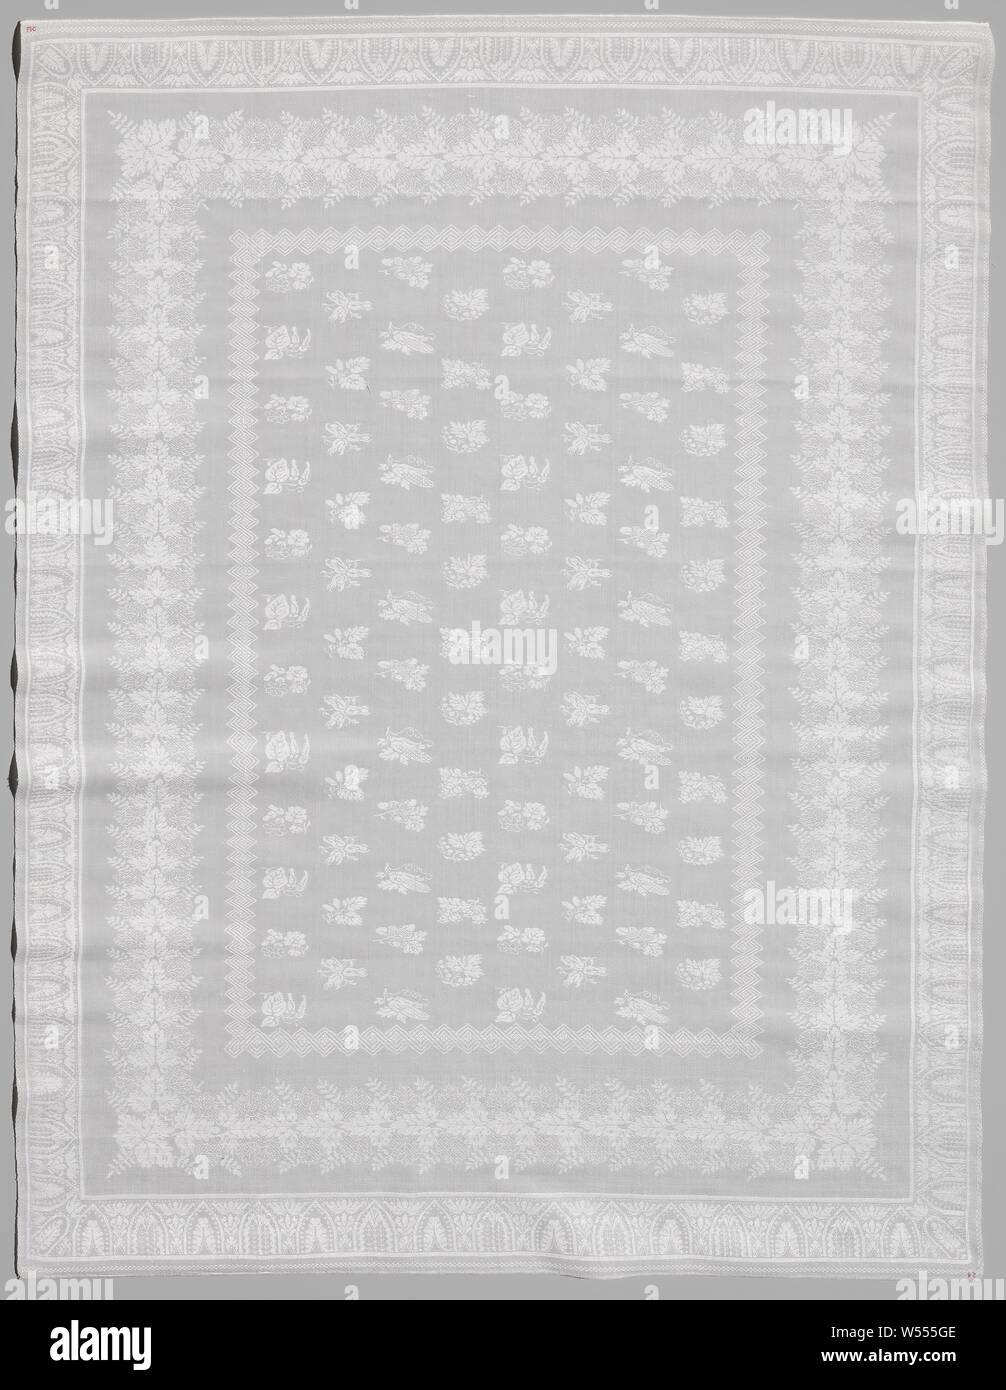 Napkin made of linen damask with a flower pattern, Napkin made of linen damask with scattered motifs and fruit branches arranged in the midfield. Running and lying edges, with 1: zigzag figures, 2: leaf pattern border contiguous, 3: closed floral border, 4: checkerboard motif. The napkin belongs to seven napkins and a tablecloth, Netherlands (possibly), c. 1800 - c. 1900, linen (material), damask, l 115.5 cm × w 86.0 cm Stock Photo